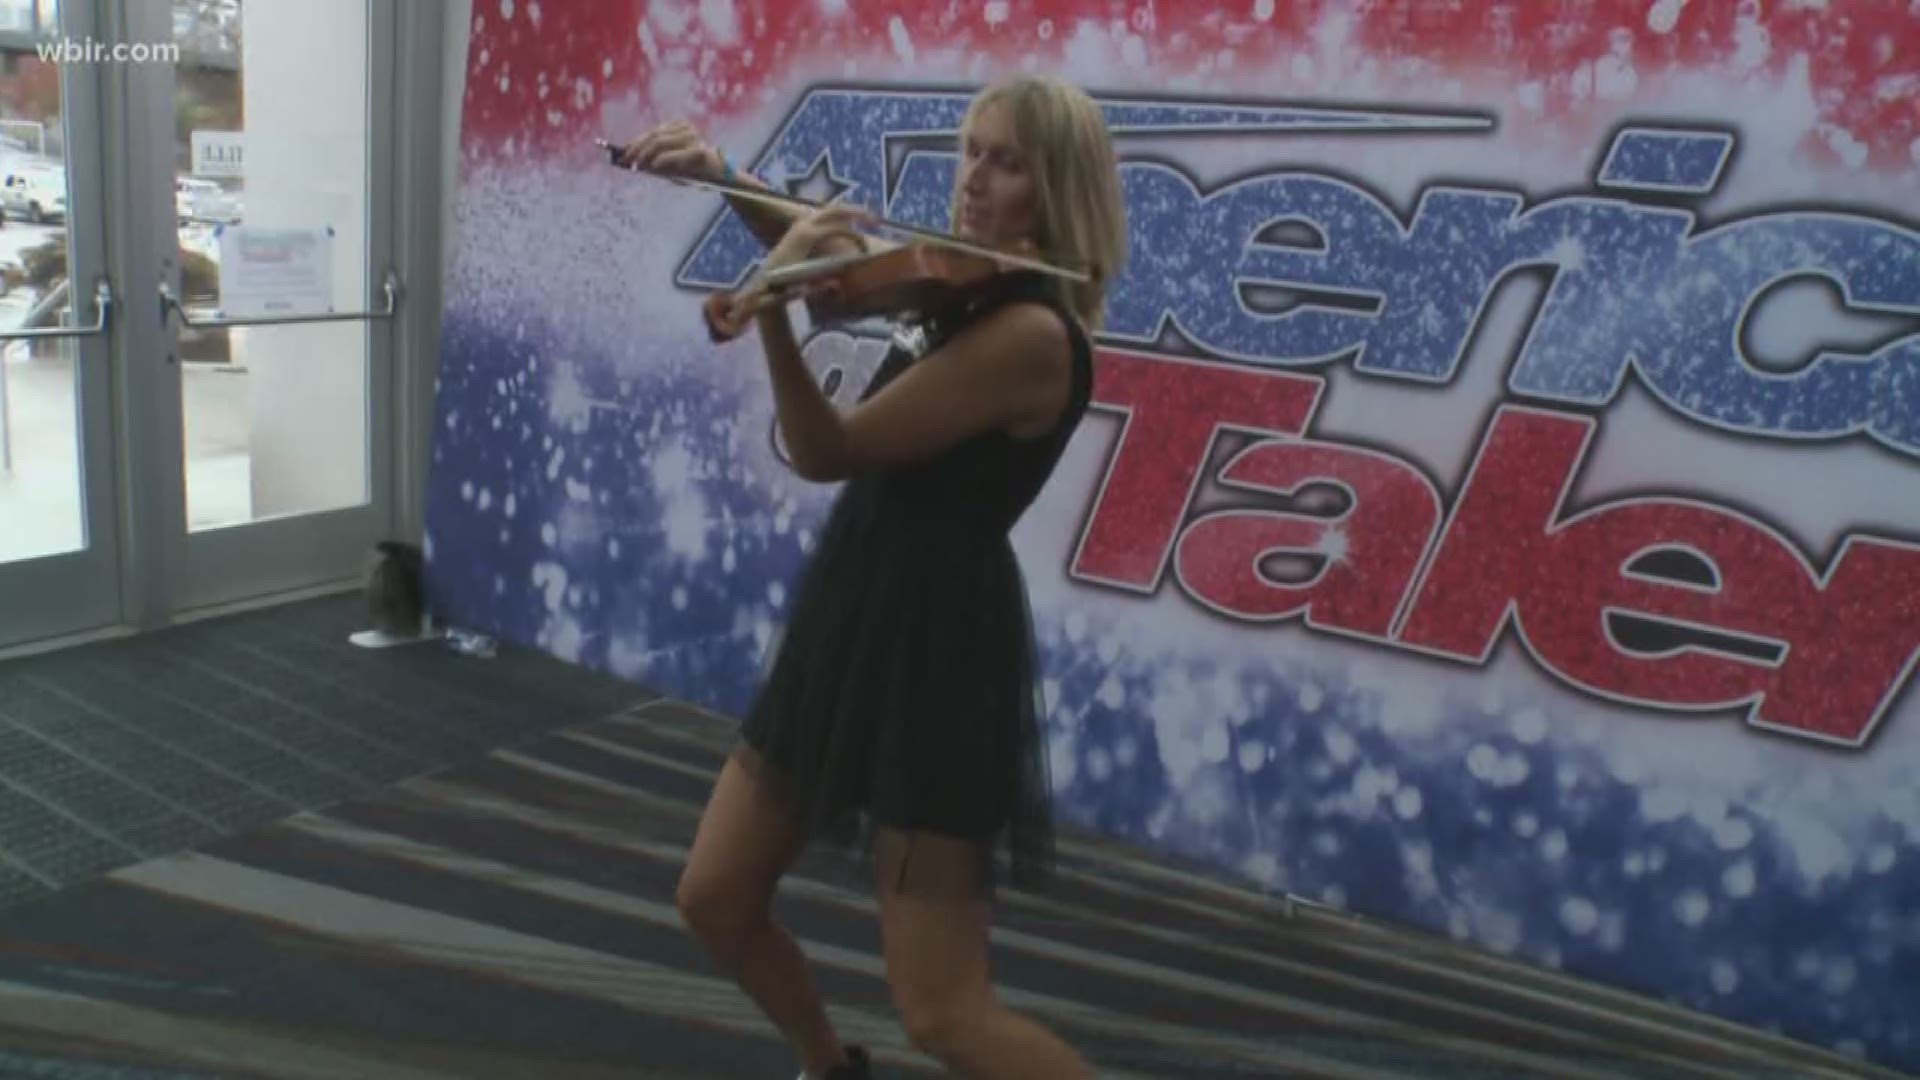 We take a look at some of the great singers and musicians who came to Knoxville to try out for America's Got Talent.